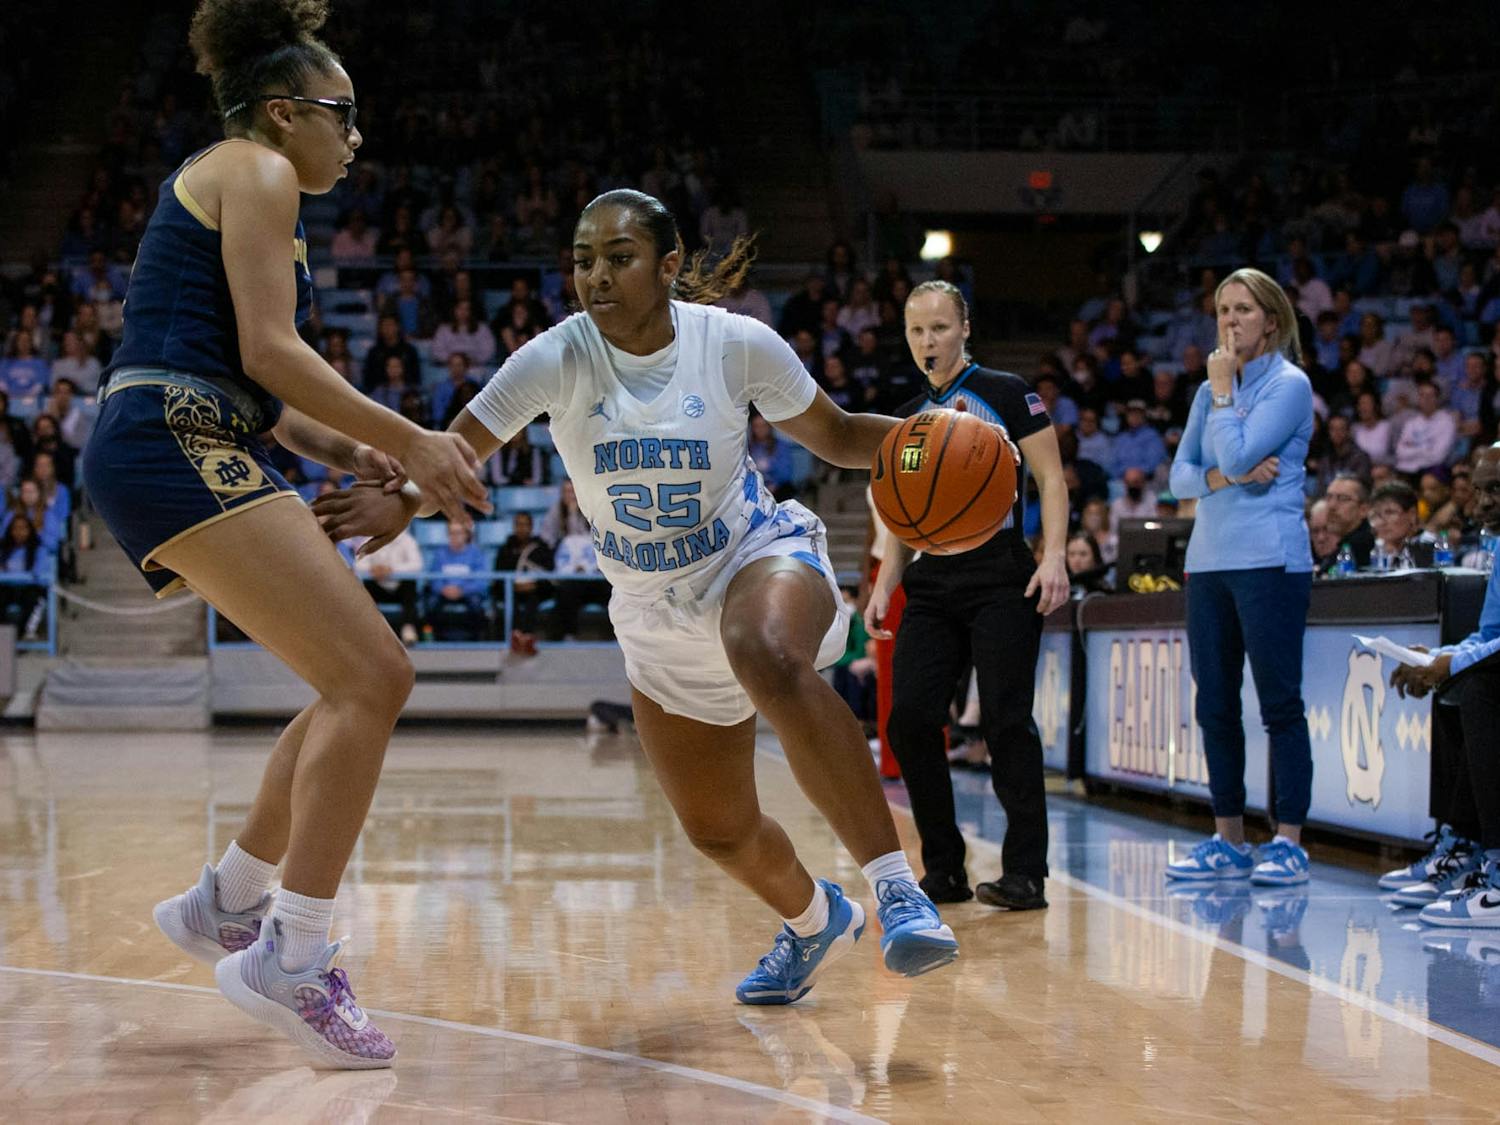 UNC junior guard Deja Kelly (25) looks for a way around her opponent, Notre Dame sophomore guard Olivia Miles (5), to pass the ball during the women's basketball game against Notre Dame on Sunday, Jan. 8 at Carmichael Arena. UNC beat Notre Dame 60-50.